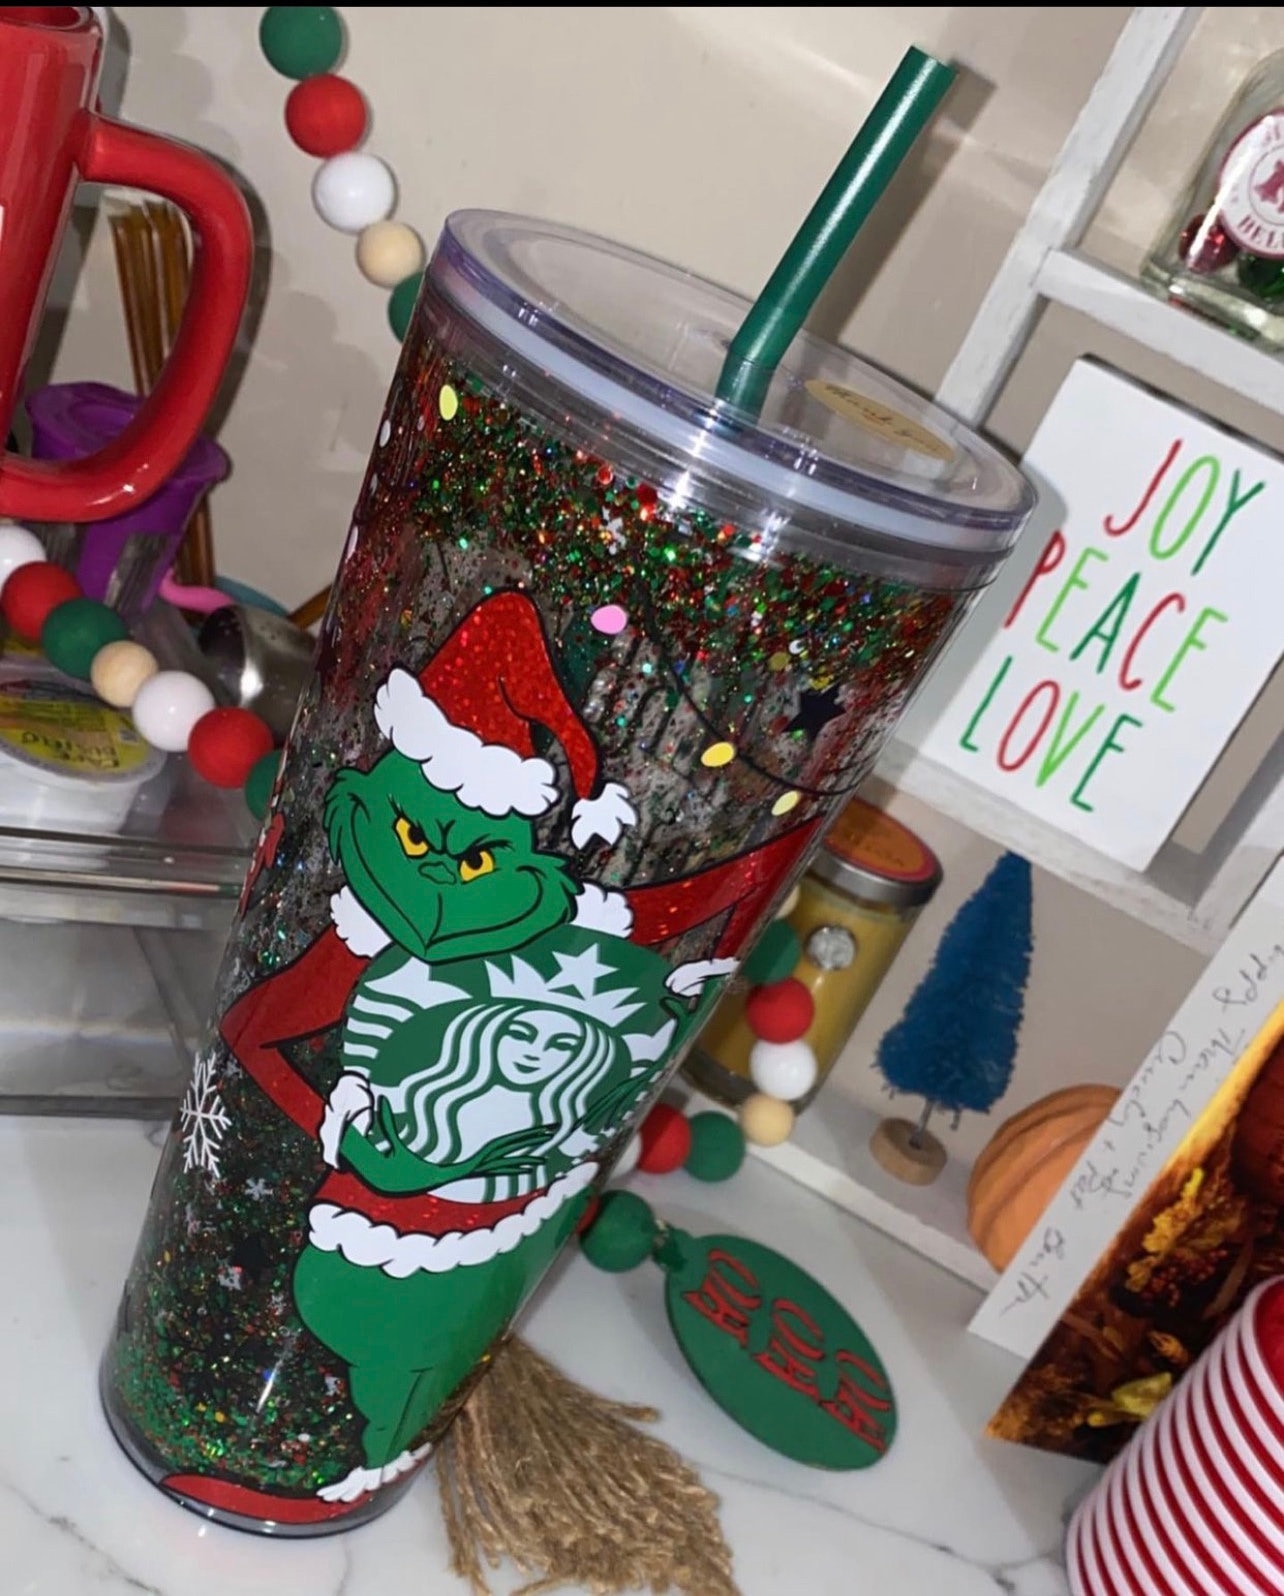 16oz The Grinch Christmas Tumbler With Straw